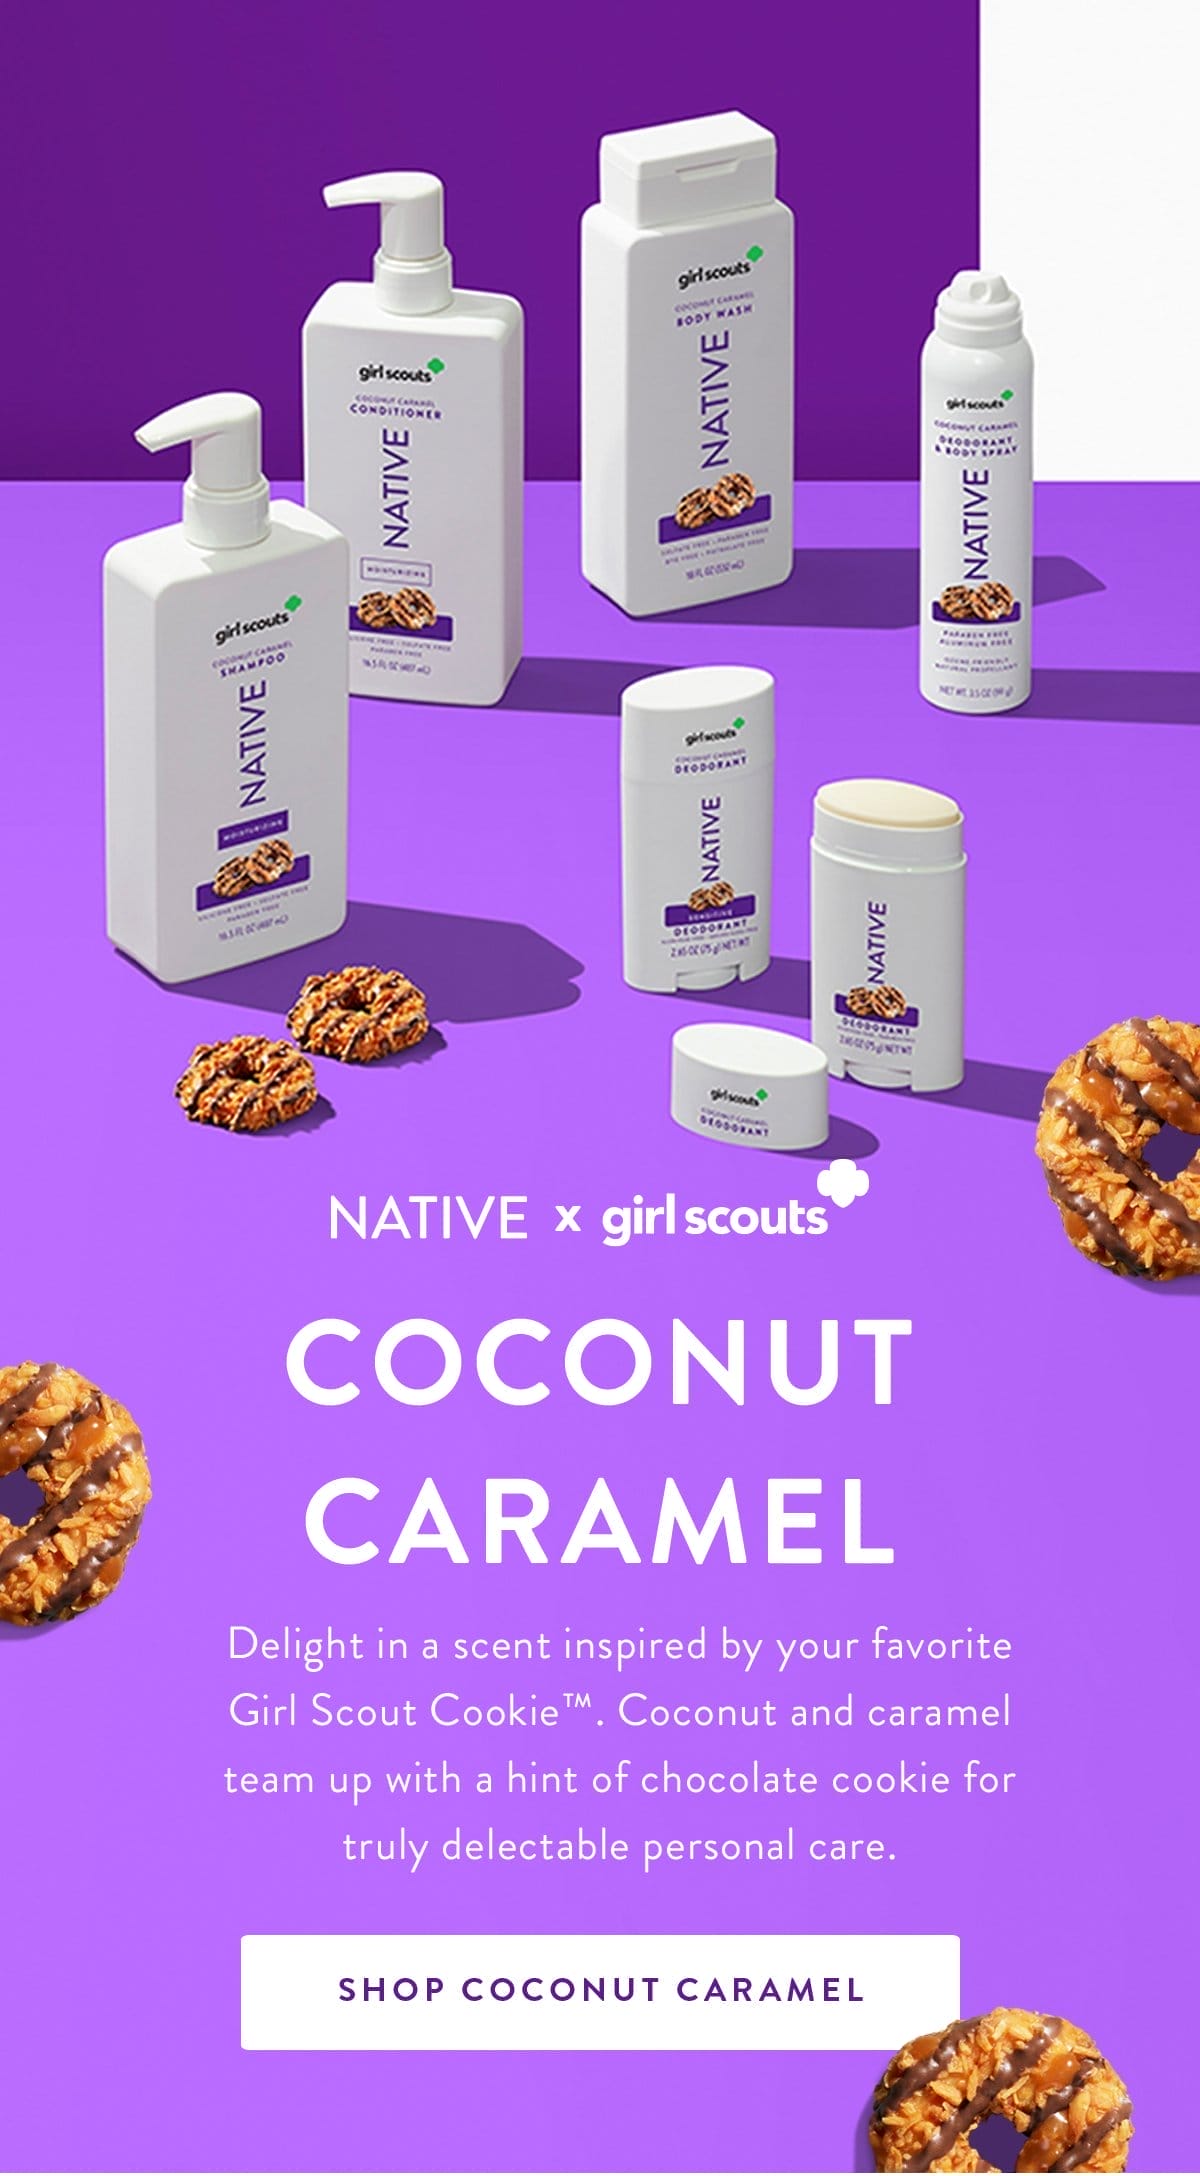 NATIVE x girl scouts | COCONUT CARAMEL | Delight in a scent inspired by your favorite Girl Scout Cookie™. Coconut and caramel team up with a hint of chocolate cookie for truly delectable personal care. | SHOP COCONUT CARAMEL